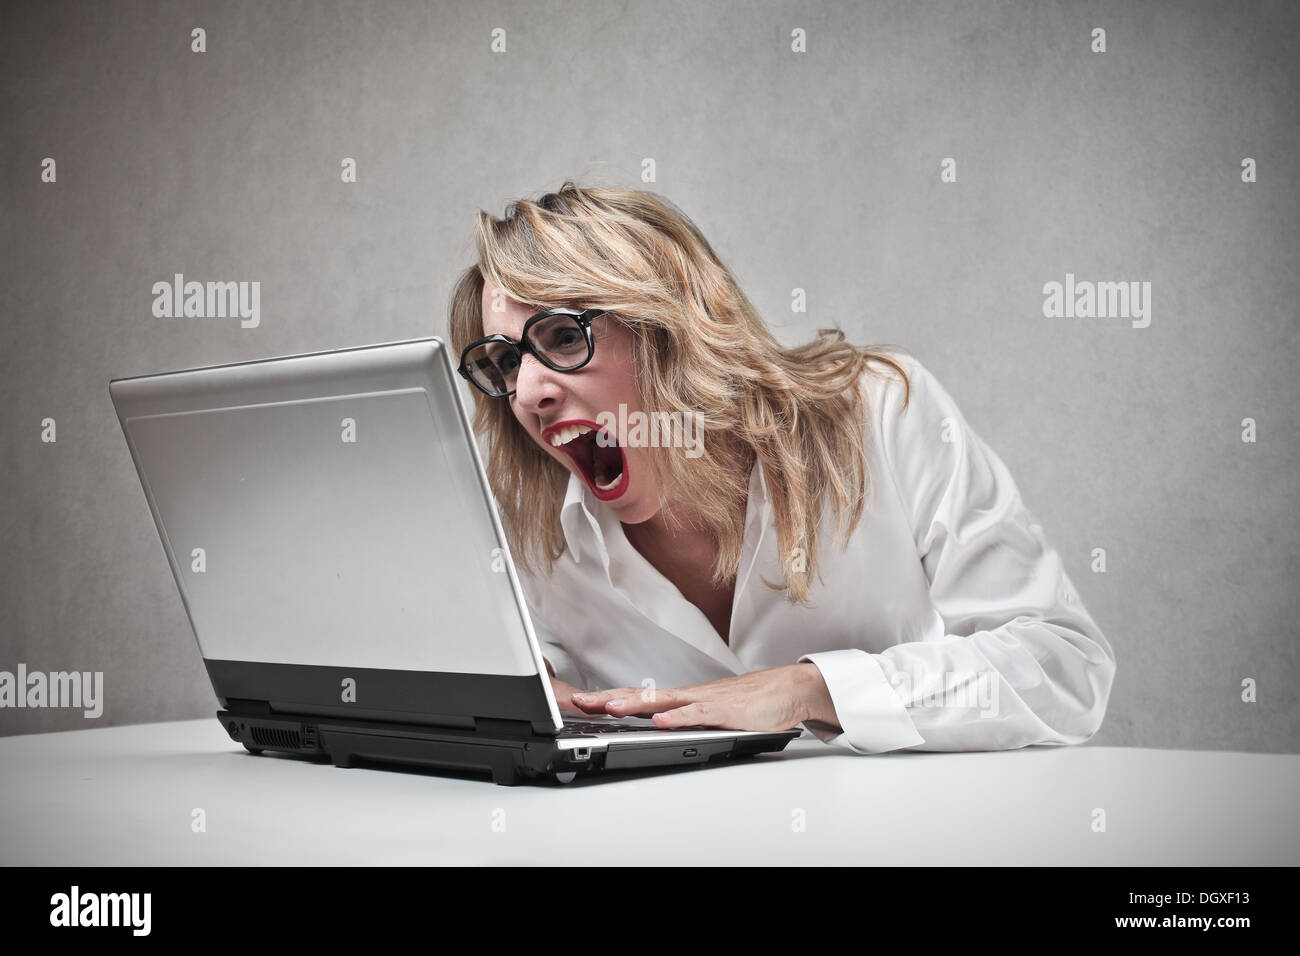 Angry blonde woman screaming against a laptop Stock Photo